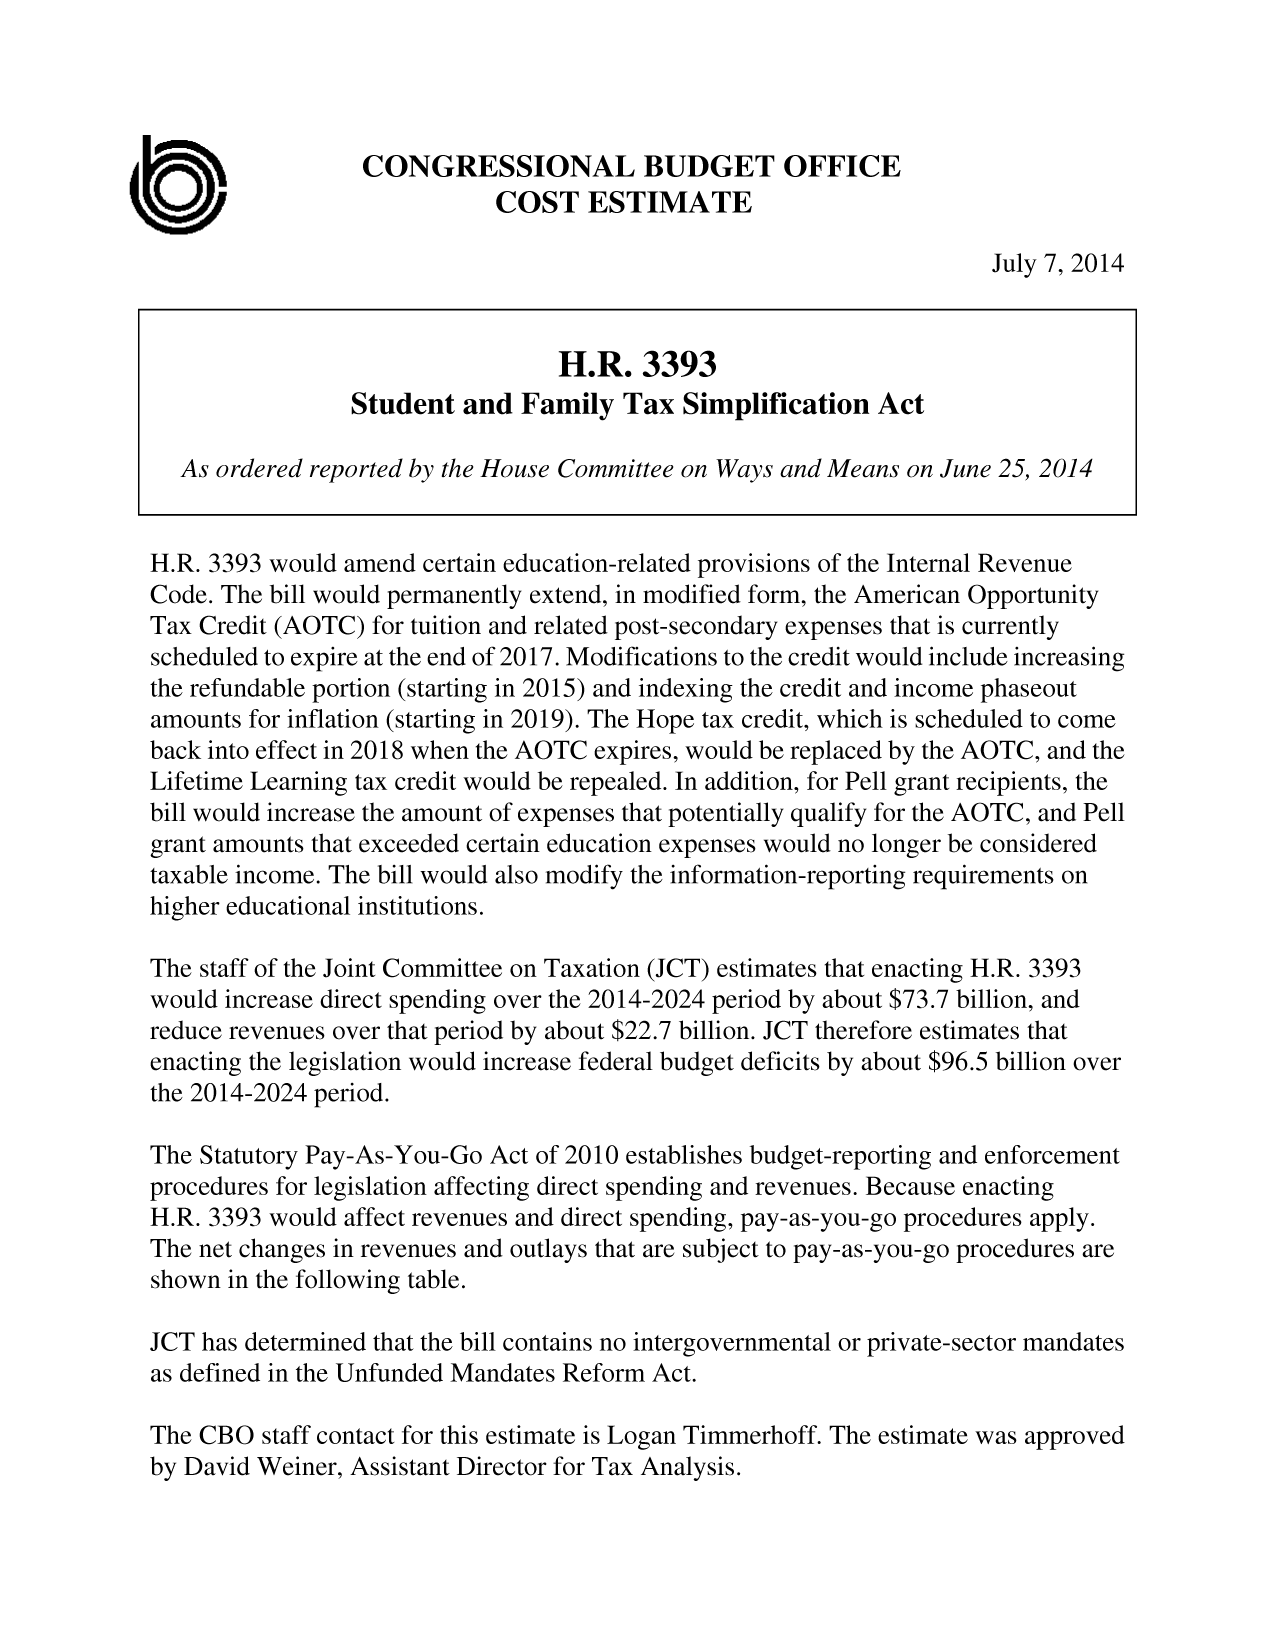 handle is hein.congrec/cbo1696 and id is 1 raw text is: CONGRESSIONAL BUDGET OFFICE
COST ESTIMATE
July 7, 2014
H.R. 3393
Student and Family Tax Simplification Act
As ordered reported by the House Committee on Ways and Means on June 25, 2014
H.R. 3393 would amend certain education-related provisions of the Internal Revenue
Code. The bill would permanently extend, in modified form, the American Opportunity
Tax Credit (AOTC) for tuition and related post-secondary expenses that is currently
scheduled to expire at the end of 2017. Modifications to the credit would include increasing
the refundable portion (starting in 2015) and indexing the credit and income phaseout
amounts for inflation (starting in 2019). The Hope tax credit, which is scheduled to come
back into effect in 2018 when the AOTC expires, would be replaced by the AOTC, and the
Lifetime Learning tax credit would be repealed. In addition, for Pell grant recipients, the
bill would increase the amount of expenses that potentially qualify for the AOTC, and Pell
grant amounts that exceeded certain education expenses would no longer be considered
taxable income. The bill would also modify the information-reporting requirements on
higher educational institutions.
The staff of the Joint Committee on Taxation (JCT) estimates that enacting H.R. 3393
would increase direct spending over the 2014-2024 period by about $73.7 billion, and
reduce revenues over that period by about $22.7 billion. JCT therefore estimates that
enacting the legislation would increase federal budget deficits by about $96.5 billion over
the 2014-2024 period.
The Statutory Pay-As-You-Go Act of 2010 establishes budget-reporting and enforcement
procedures for legislation affecting direct spending and revenues. Because enacting
H.R. 3393 would affect revenues and direct spending, pay-as-you-go procedures apply.
The net changes in revenues and outlays that are subject to pay-as-you-go procedures are
shown in the following table.
JCT has determined that the bill contains no intergovernmental or private-sector mandates
as defined in the Unfunded Mandates Reform Act.
The CBO staff contact for this estimate is Logan Timmerhoff. The estimate was approved
by David Weiner, Assistant Director for Tax Analysis.


